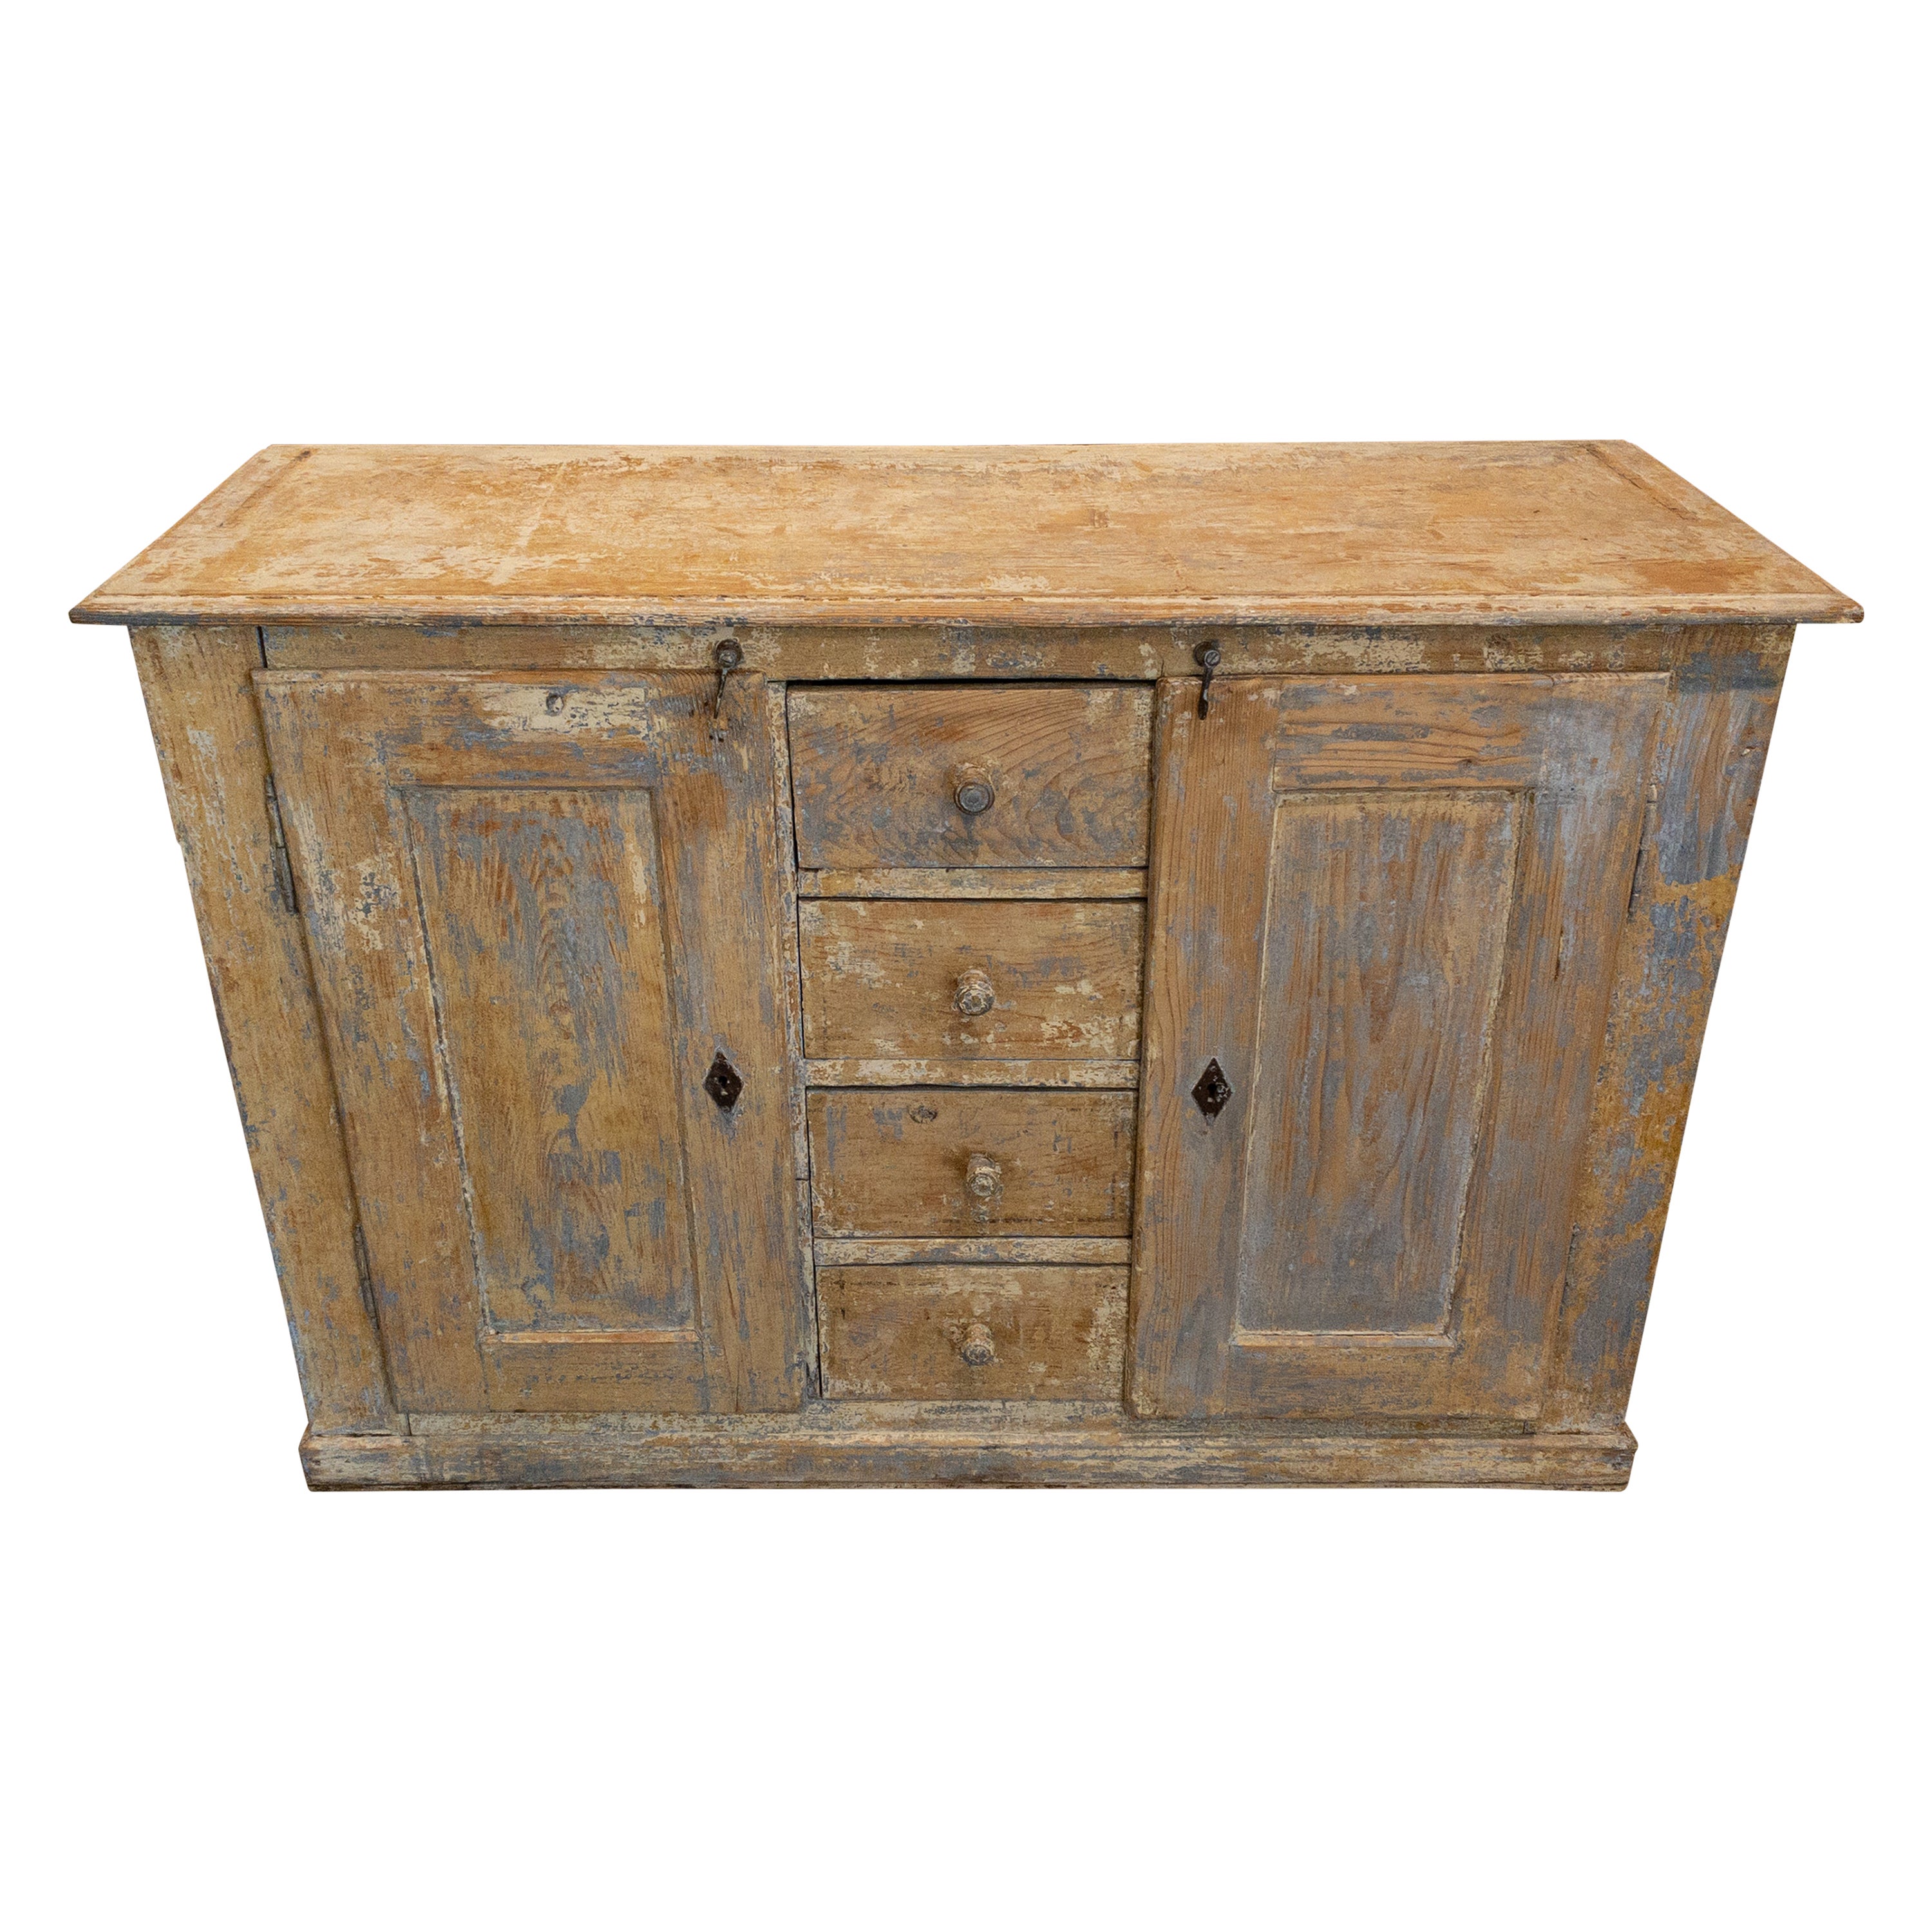 Gustavian Swedish Cabinet / Buffet with a Scraped Painted Finish For Sale